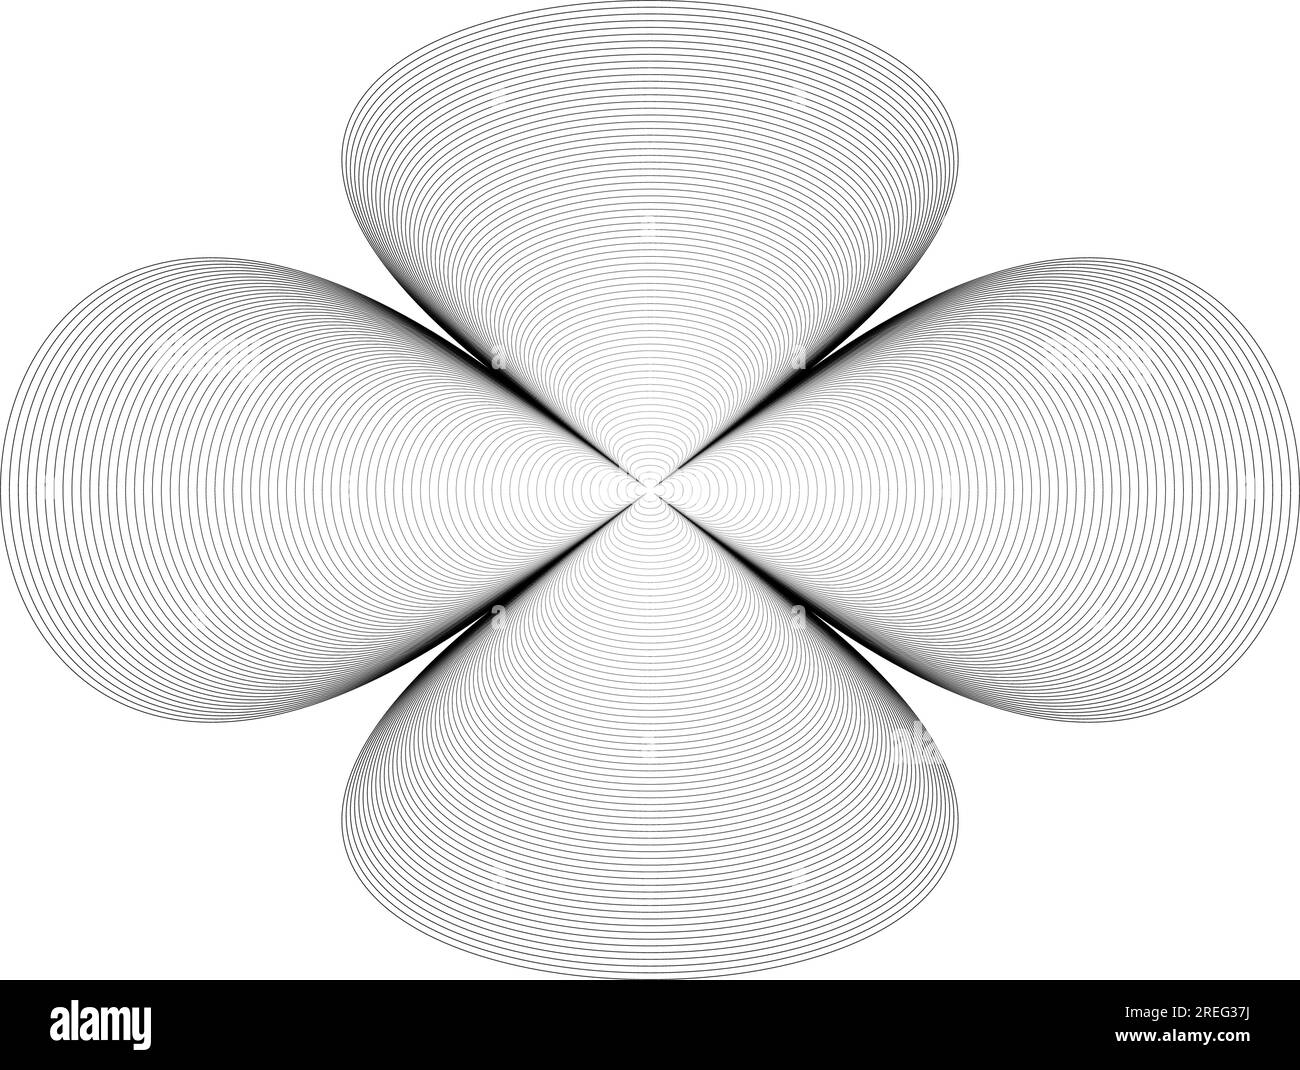 Black lines pattern in clover form isolated on white background. For design elements in concept of technology, science or modern. Stock Vector